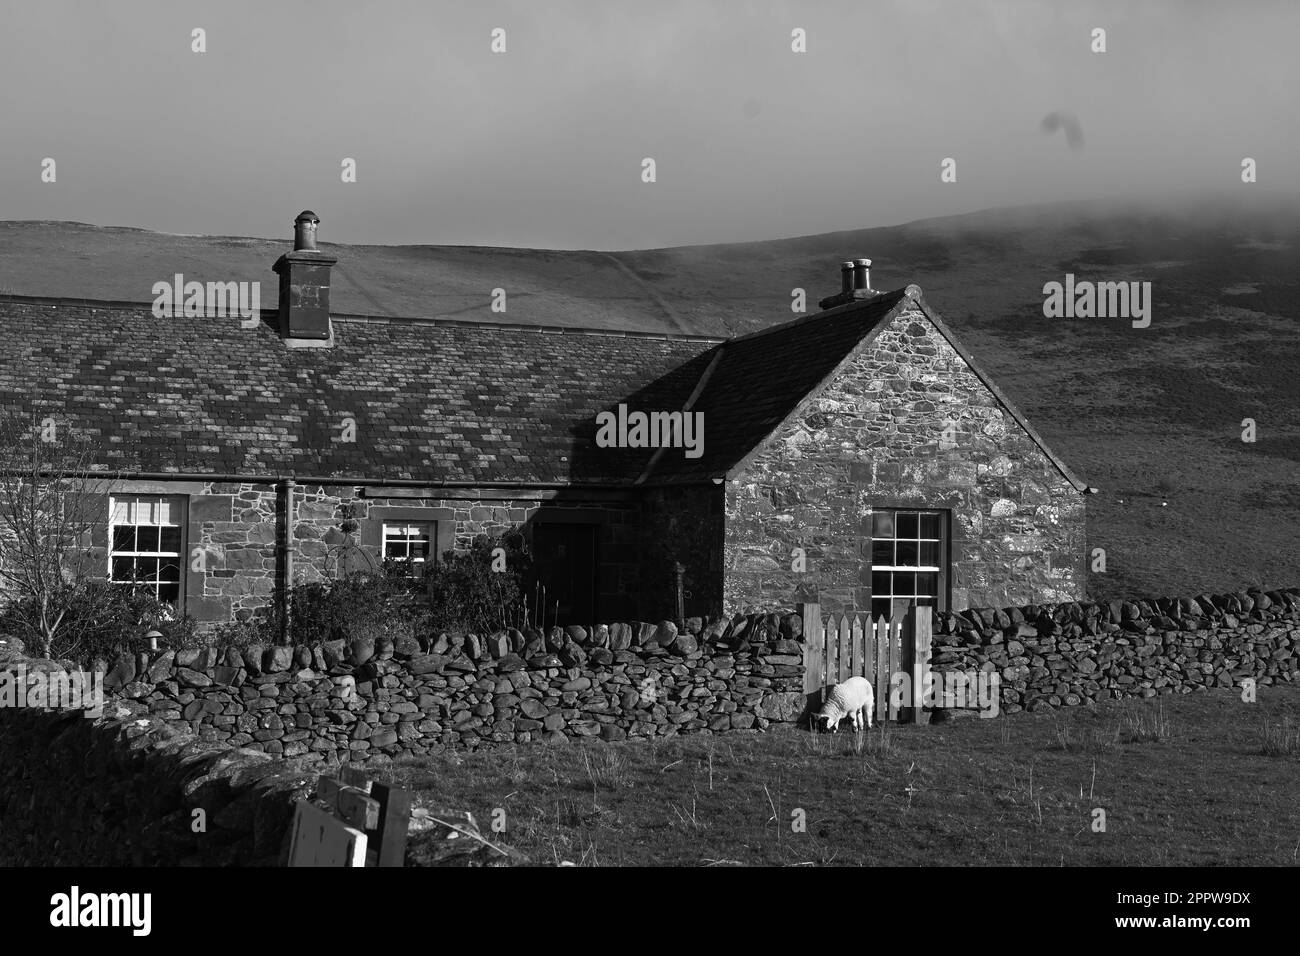 Scottish countryside pictures Stock Photo - Alamy